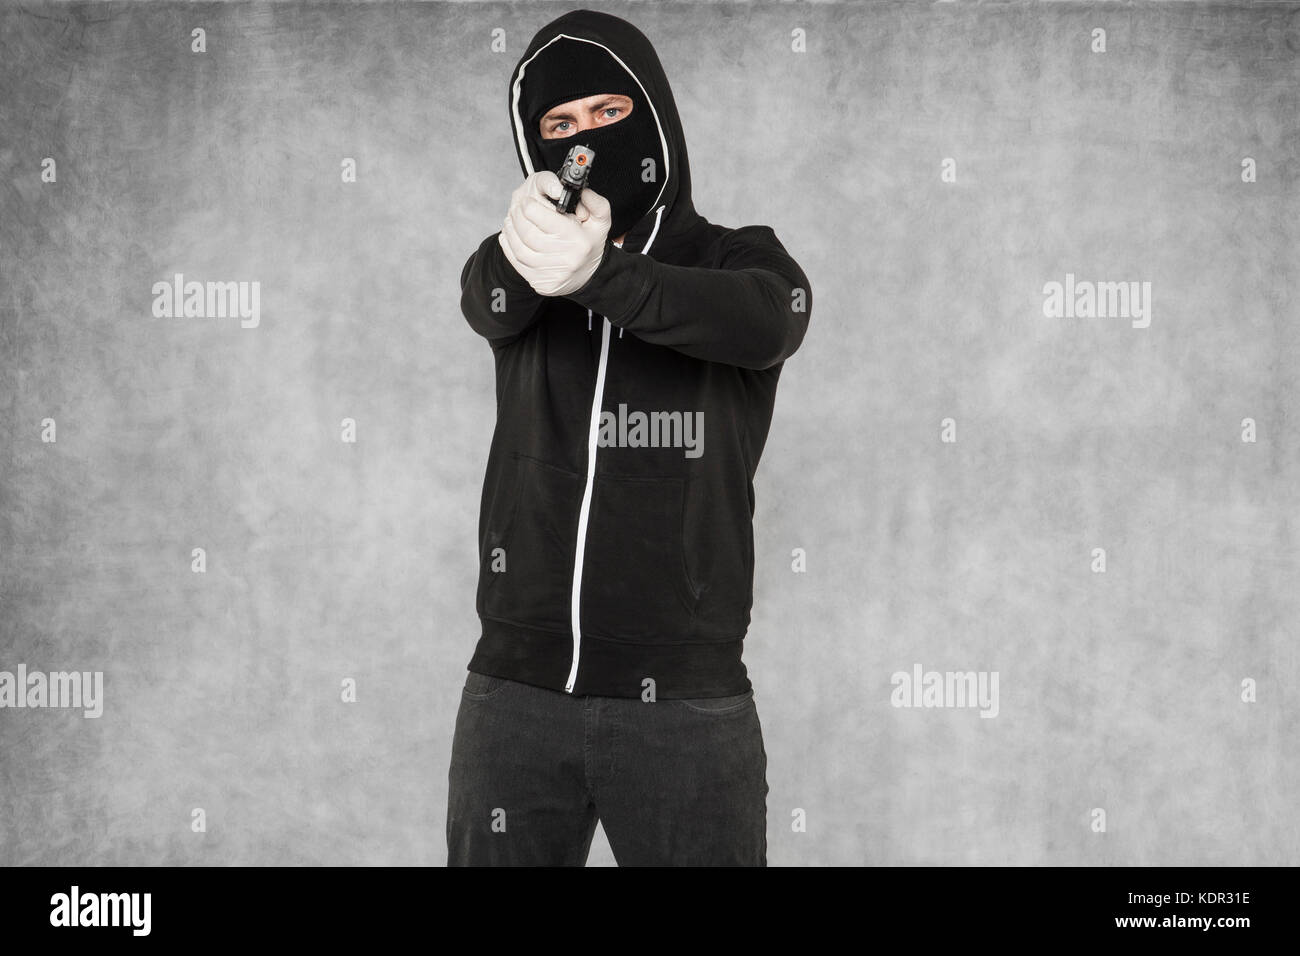 terrorist with arms in his hands Stock Photo